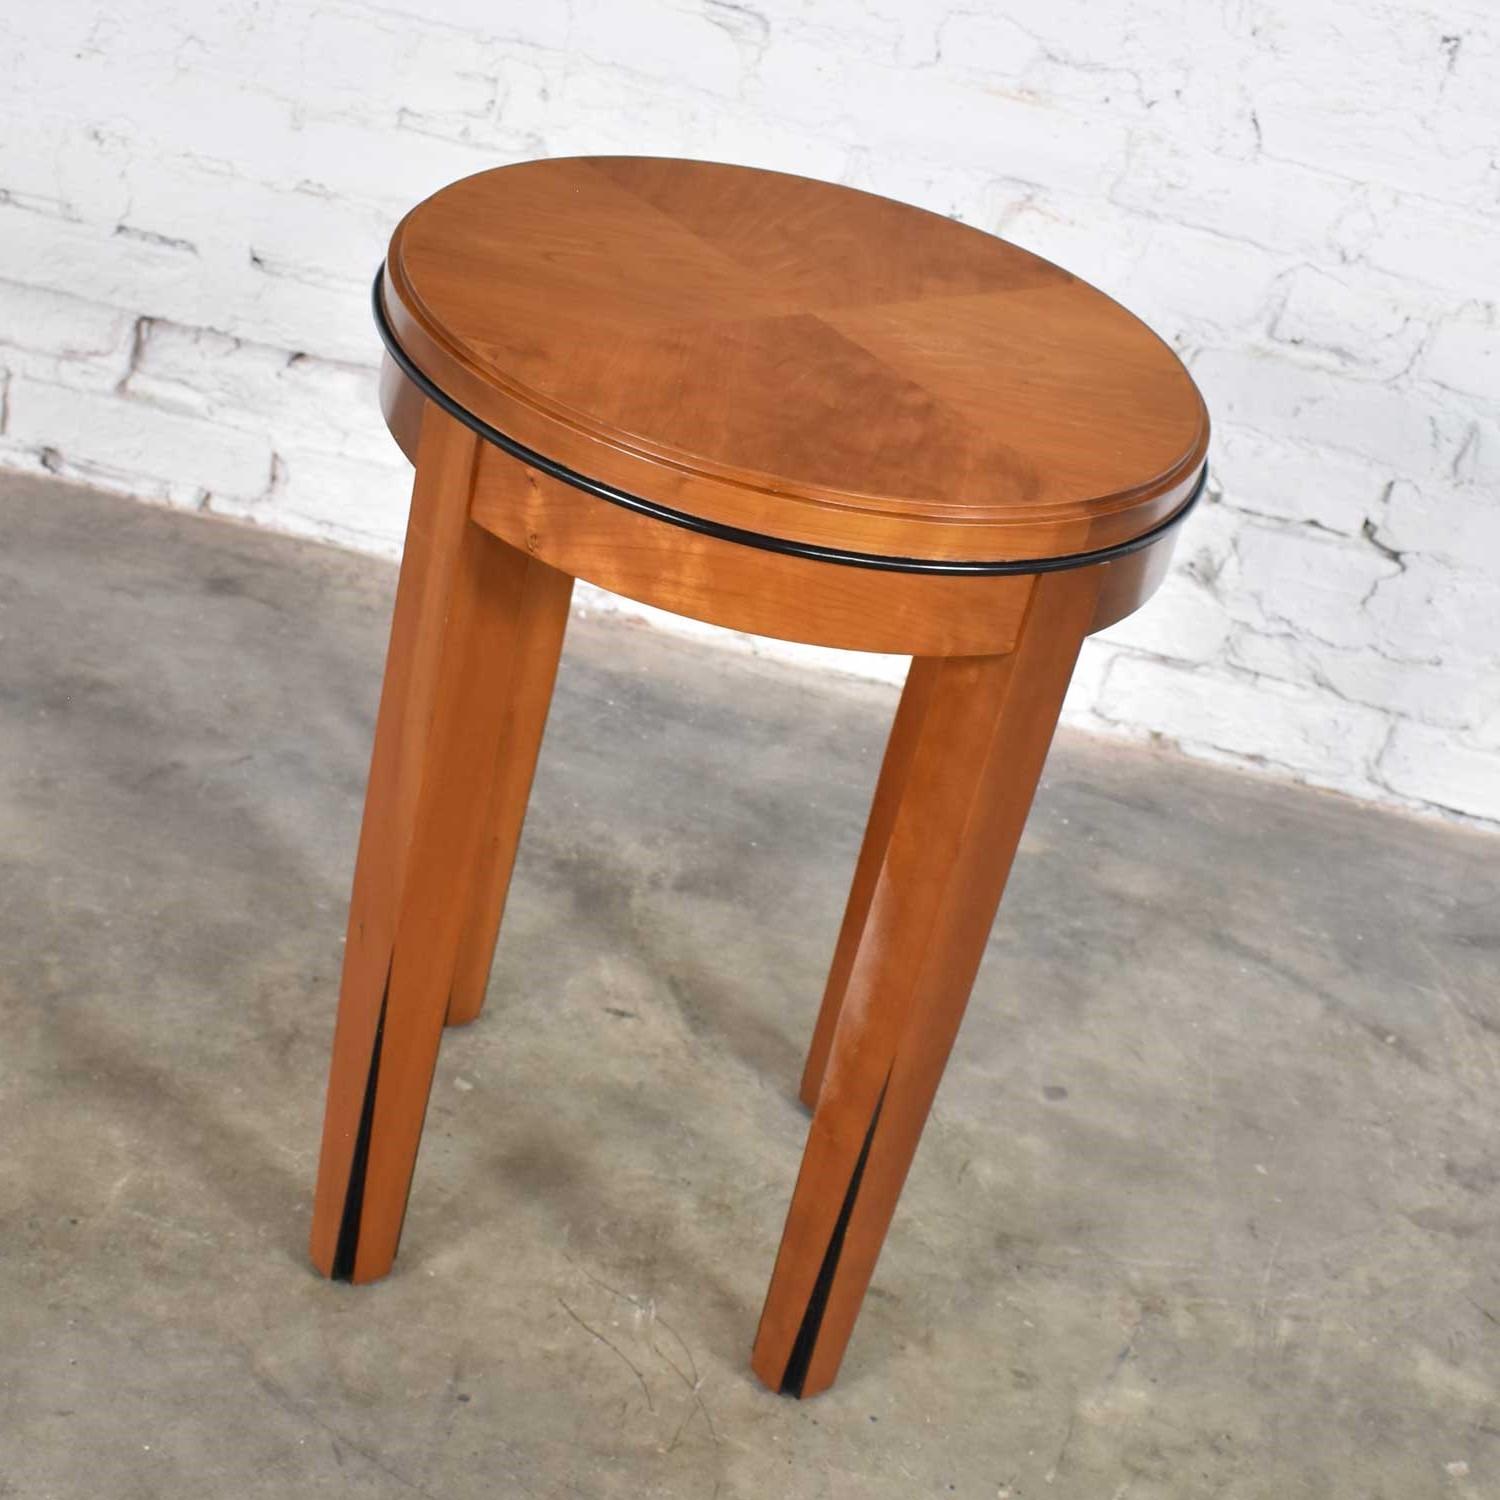 American Small Round Art Deco Style Side Table or End Table by Hickory Business Furniture